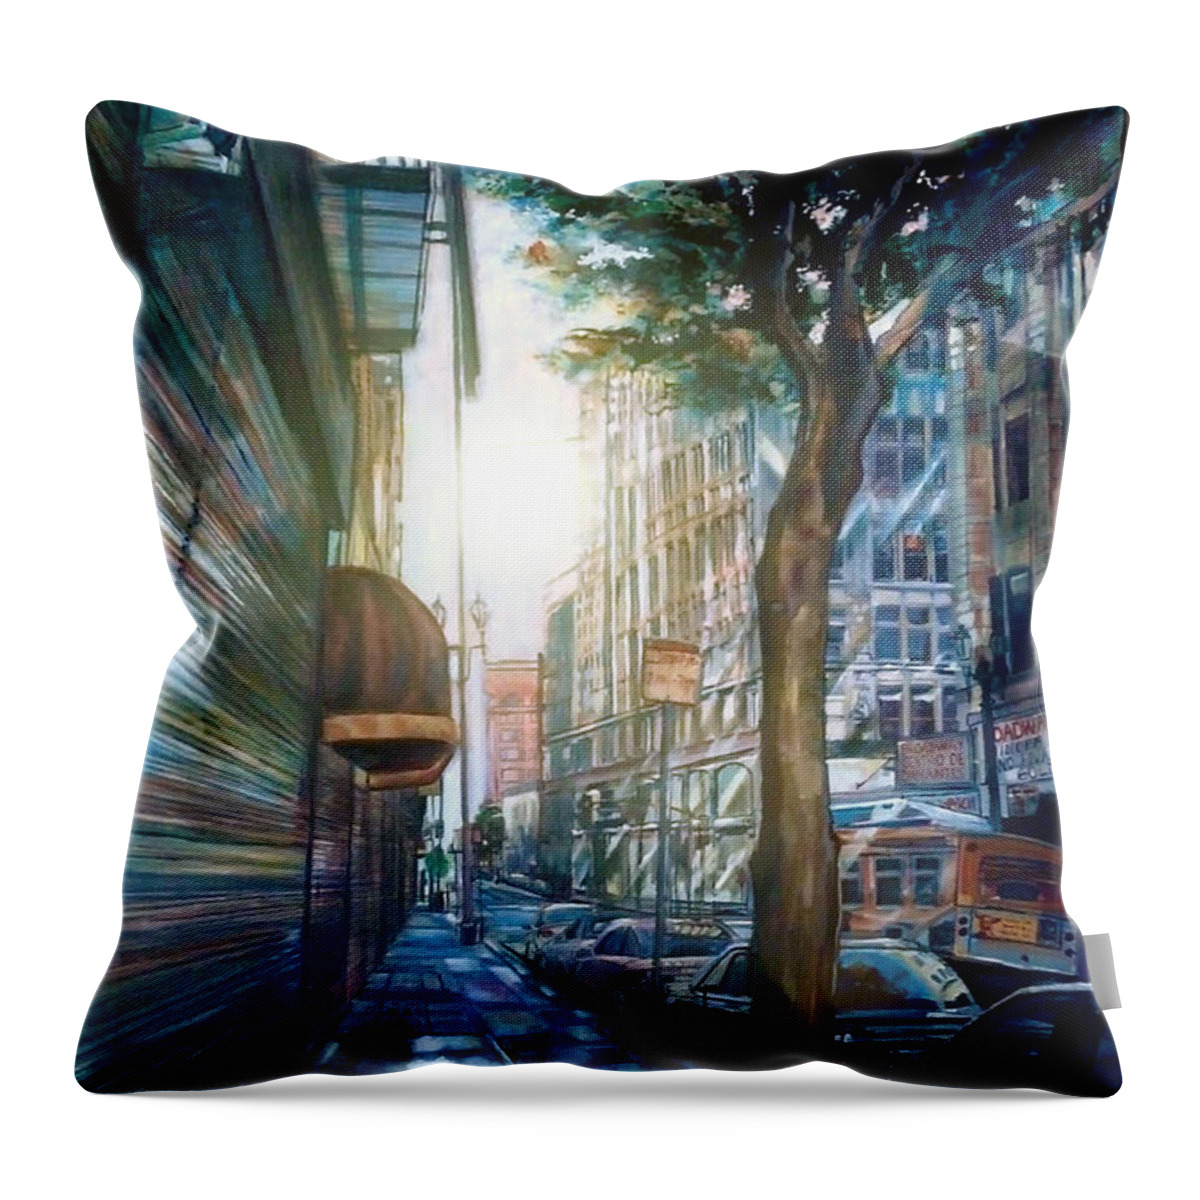  Throw Pillow featuring the painting Downtown by Try Cheatham